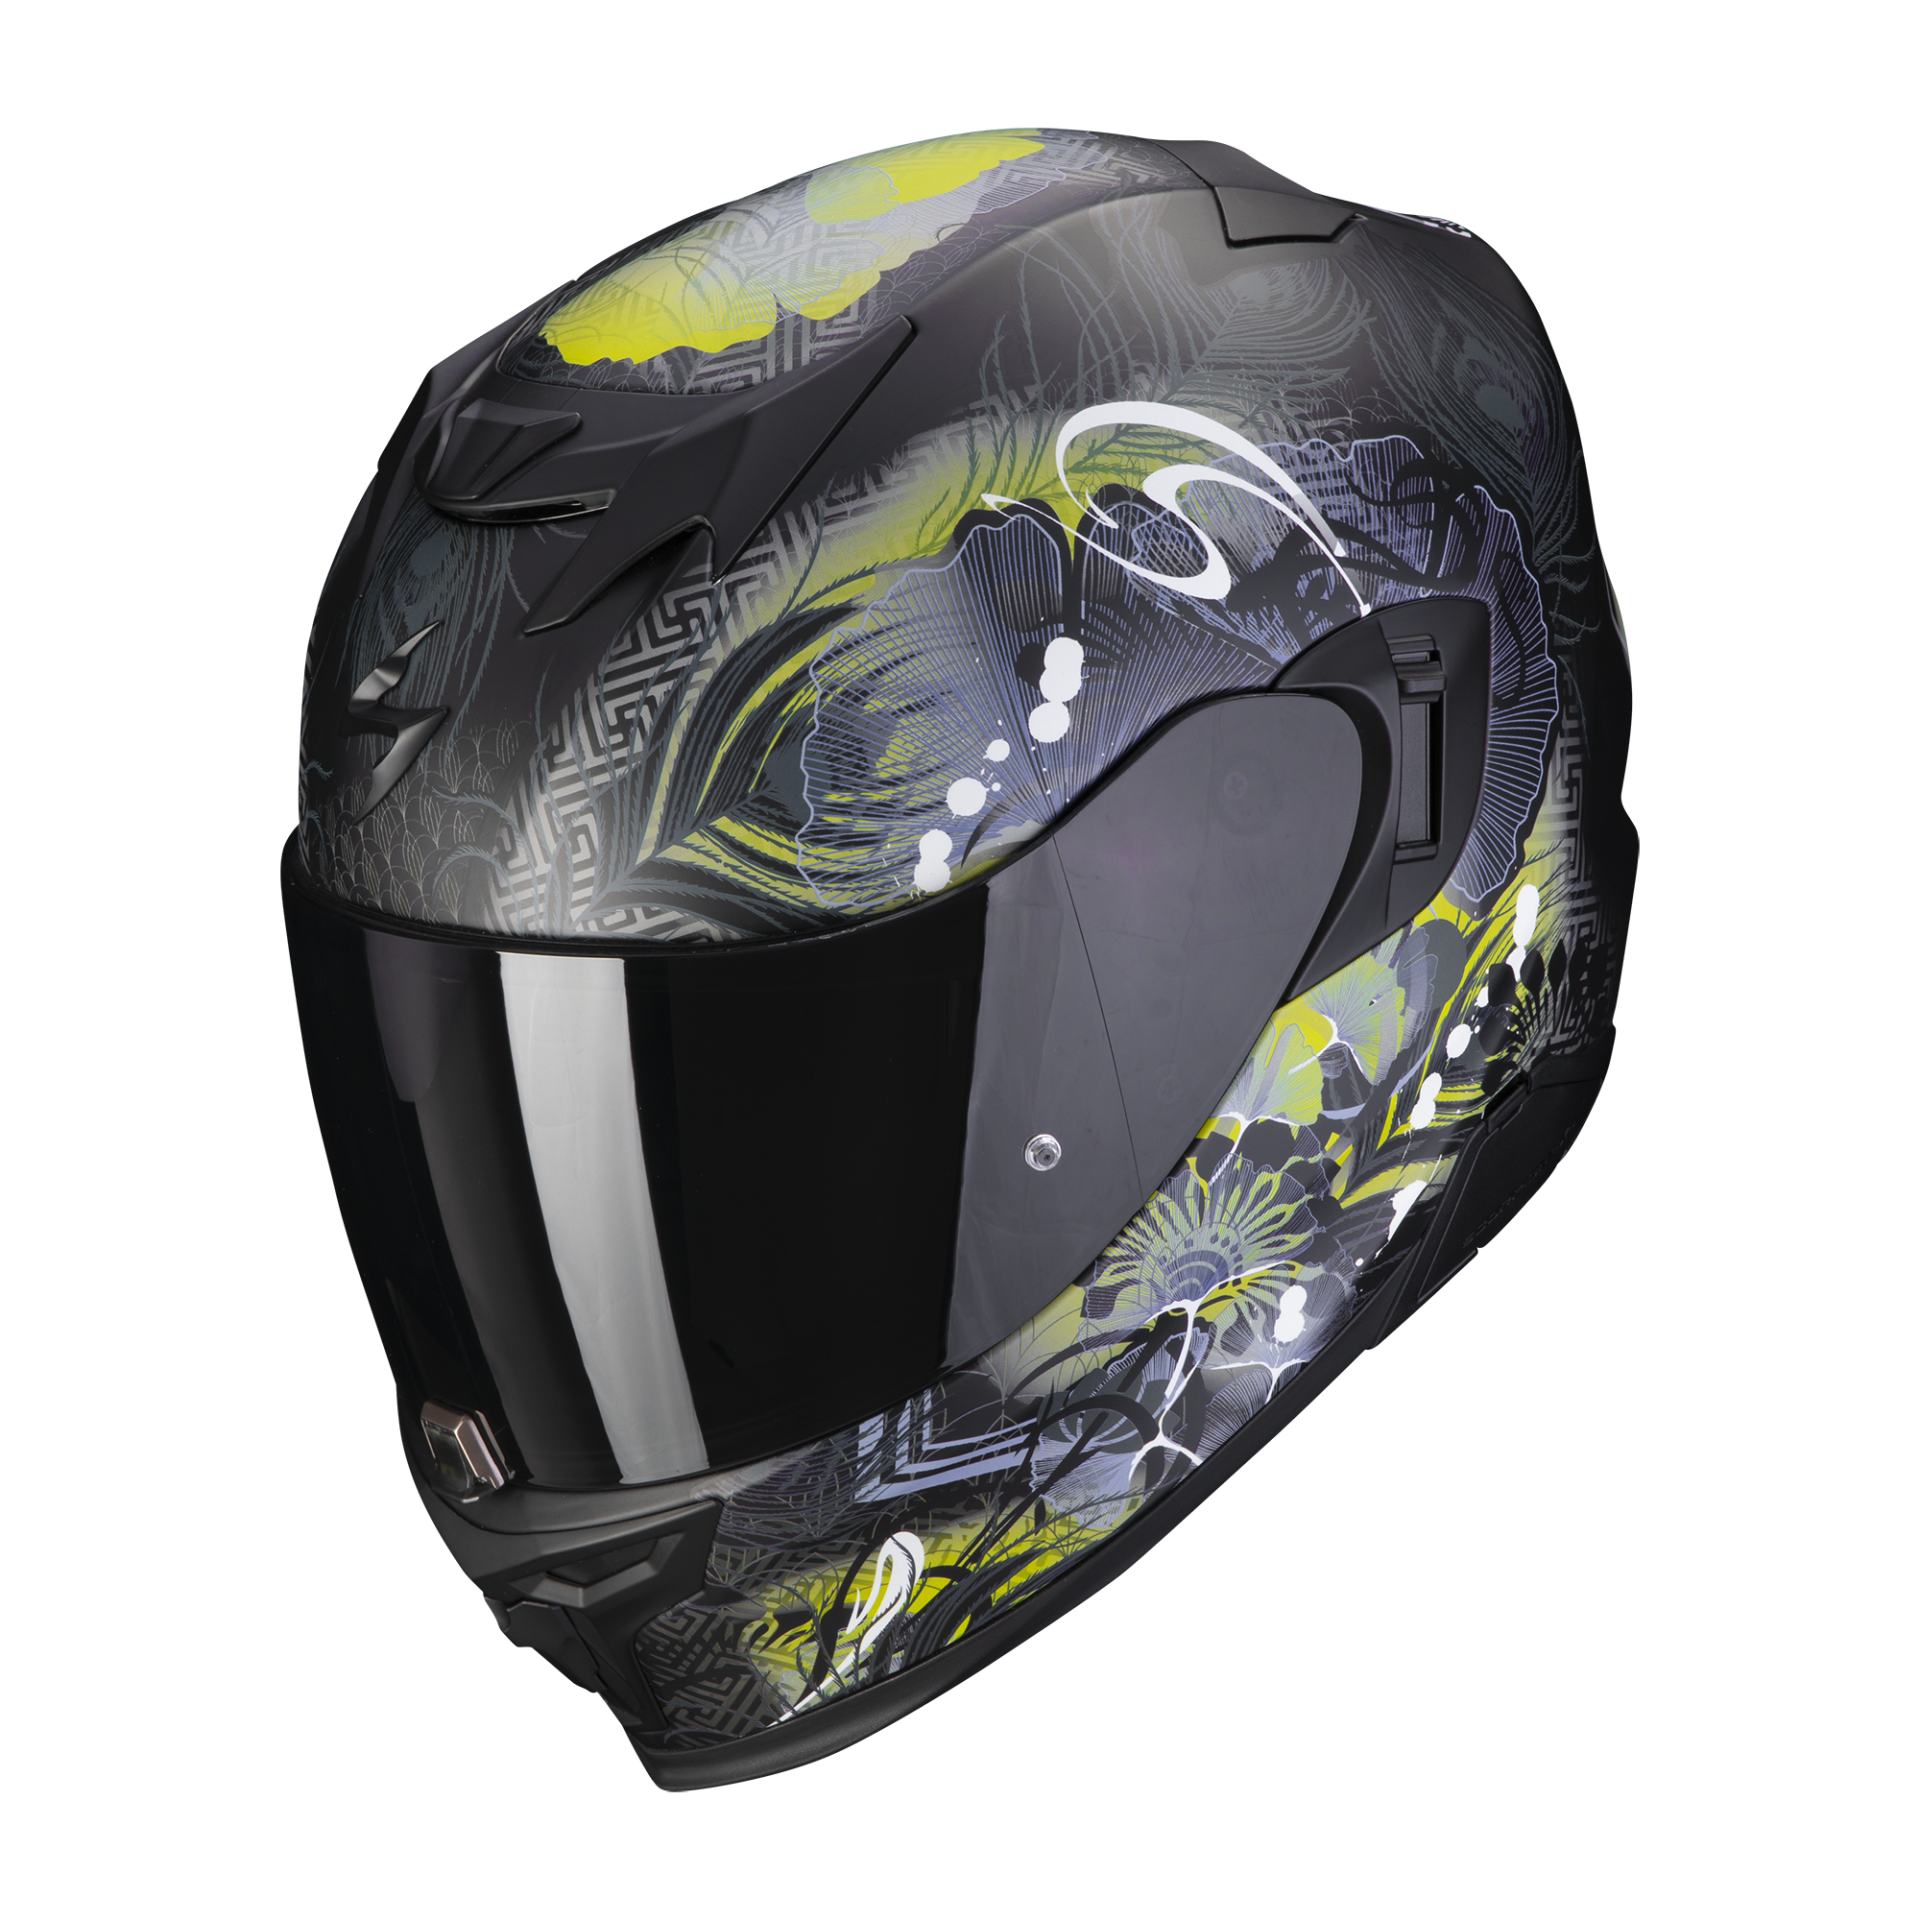 Image of Scorpion Exo-520 Evo Air Melrose Mat Black-Yellow Casque Intégral Taille XS